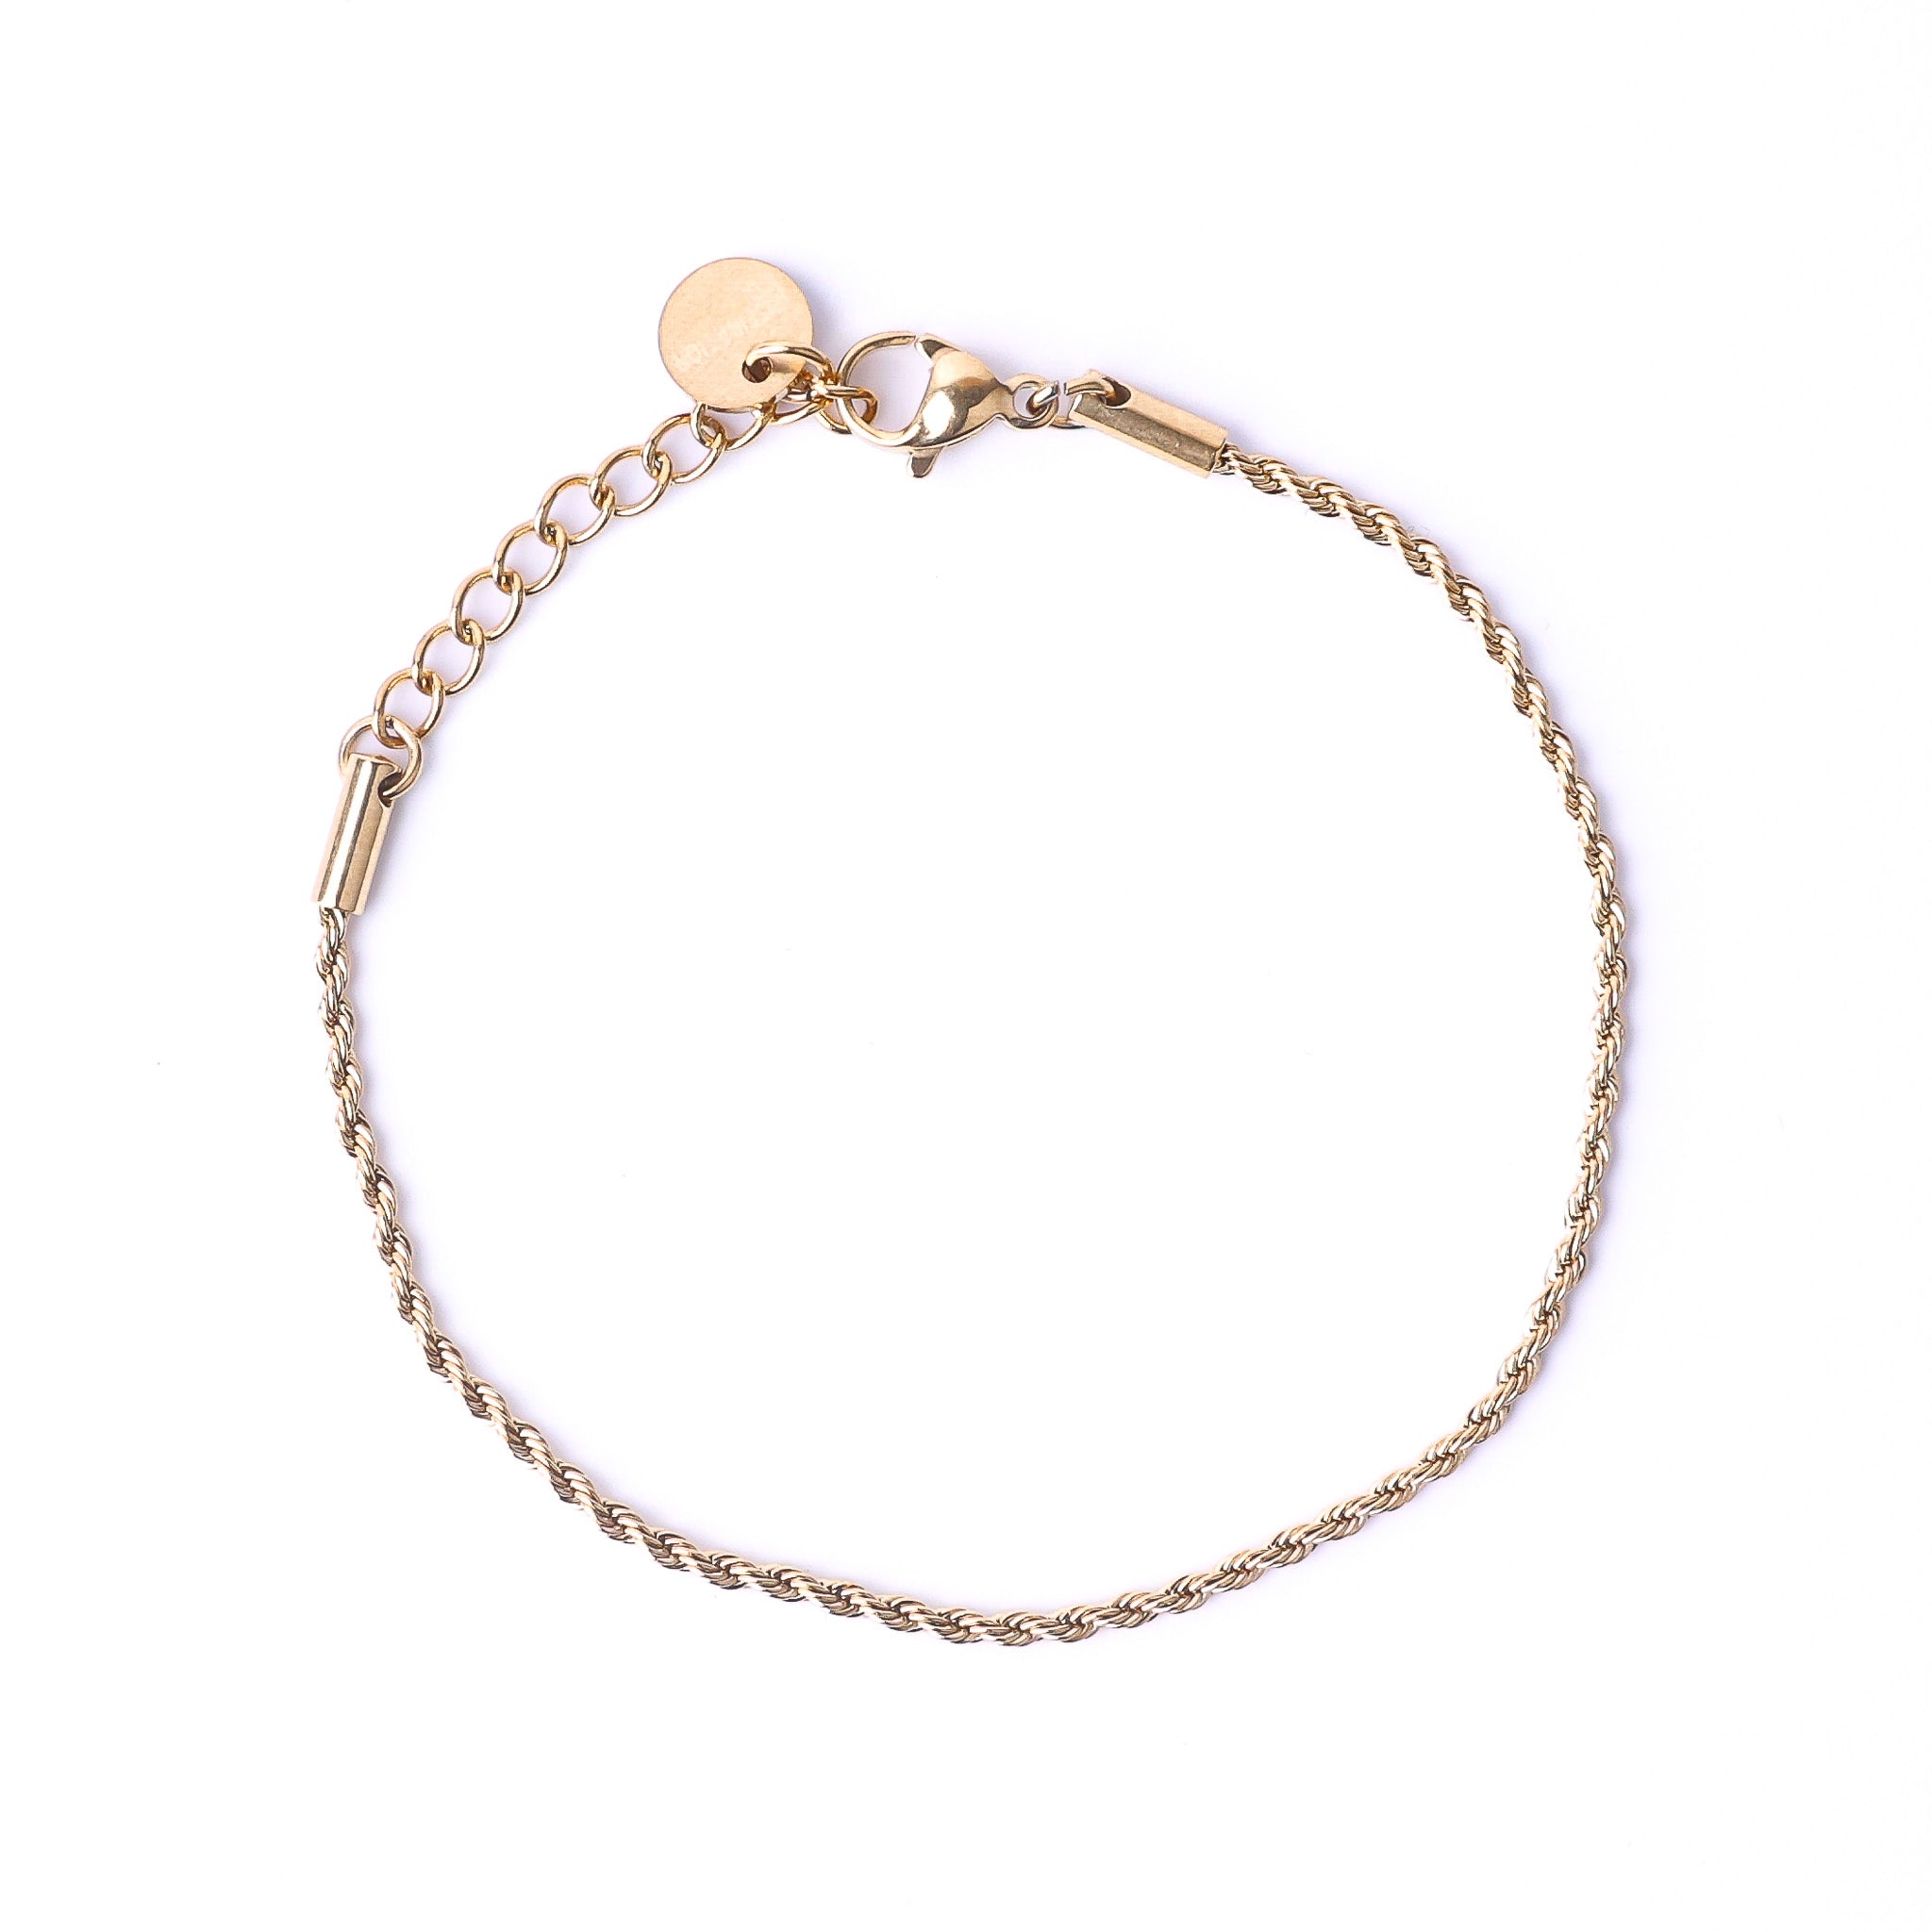 ROPE ACCENT CHAIN BRACELET